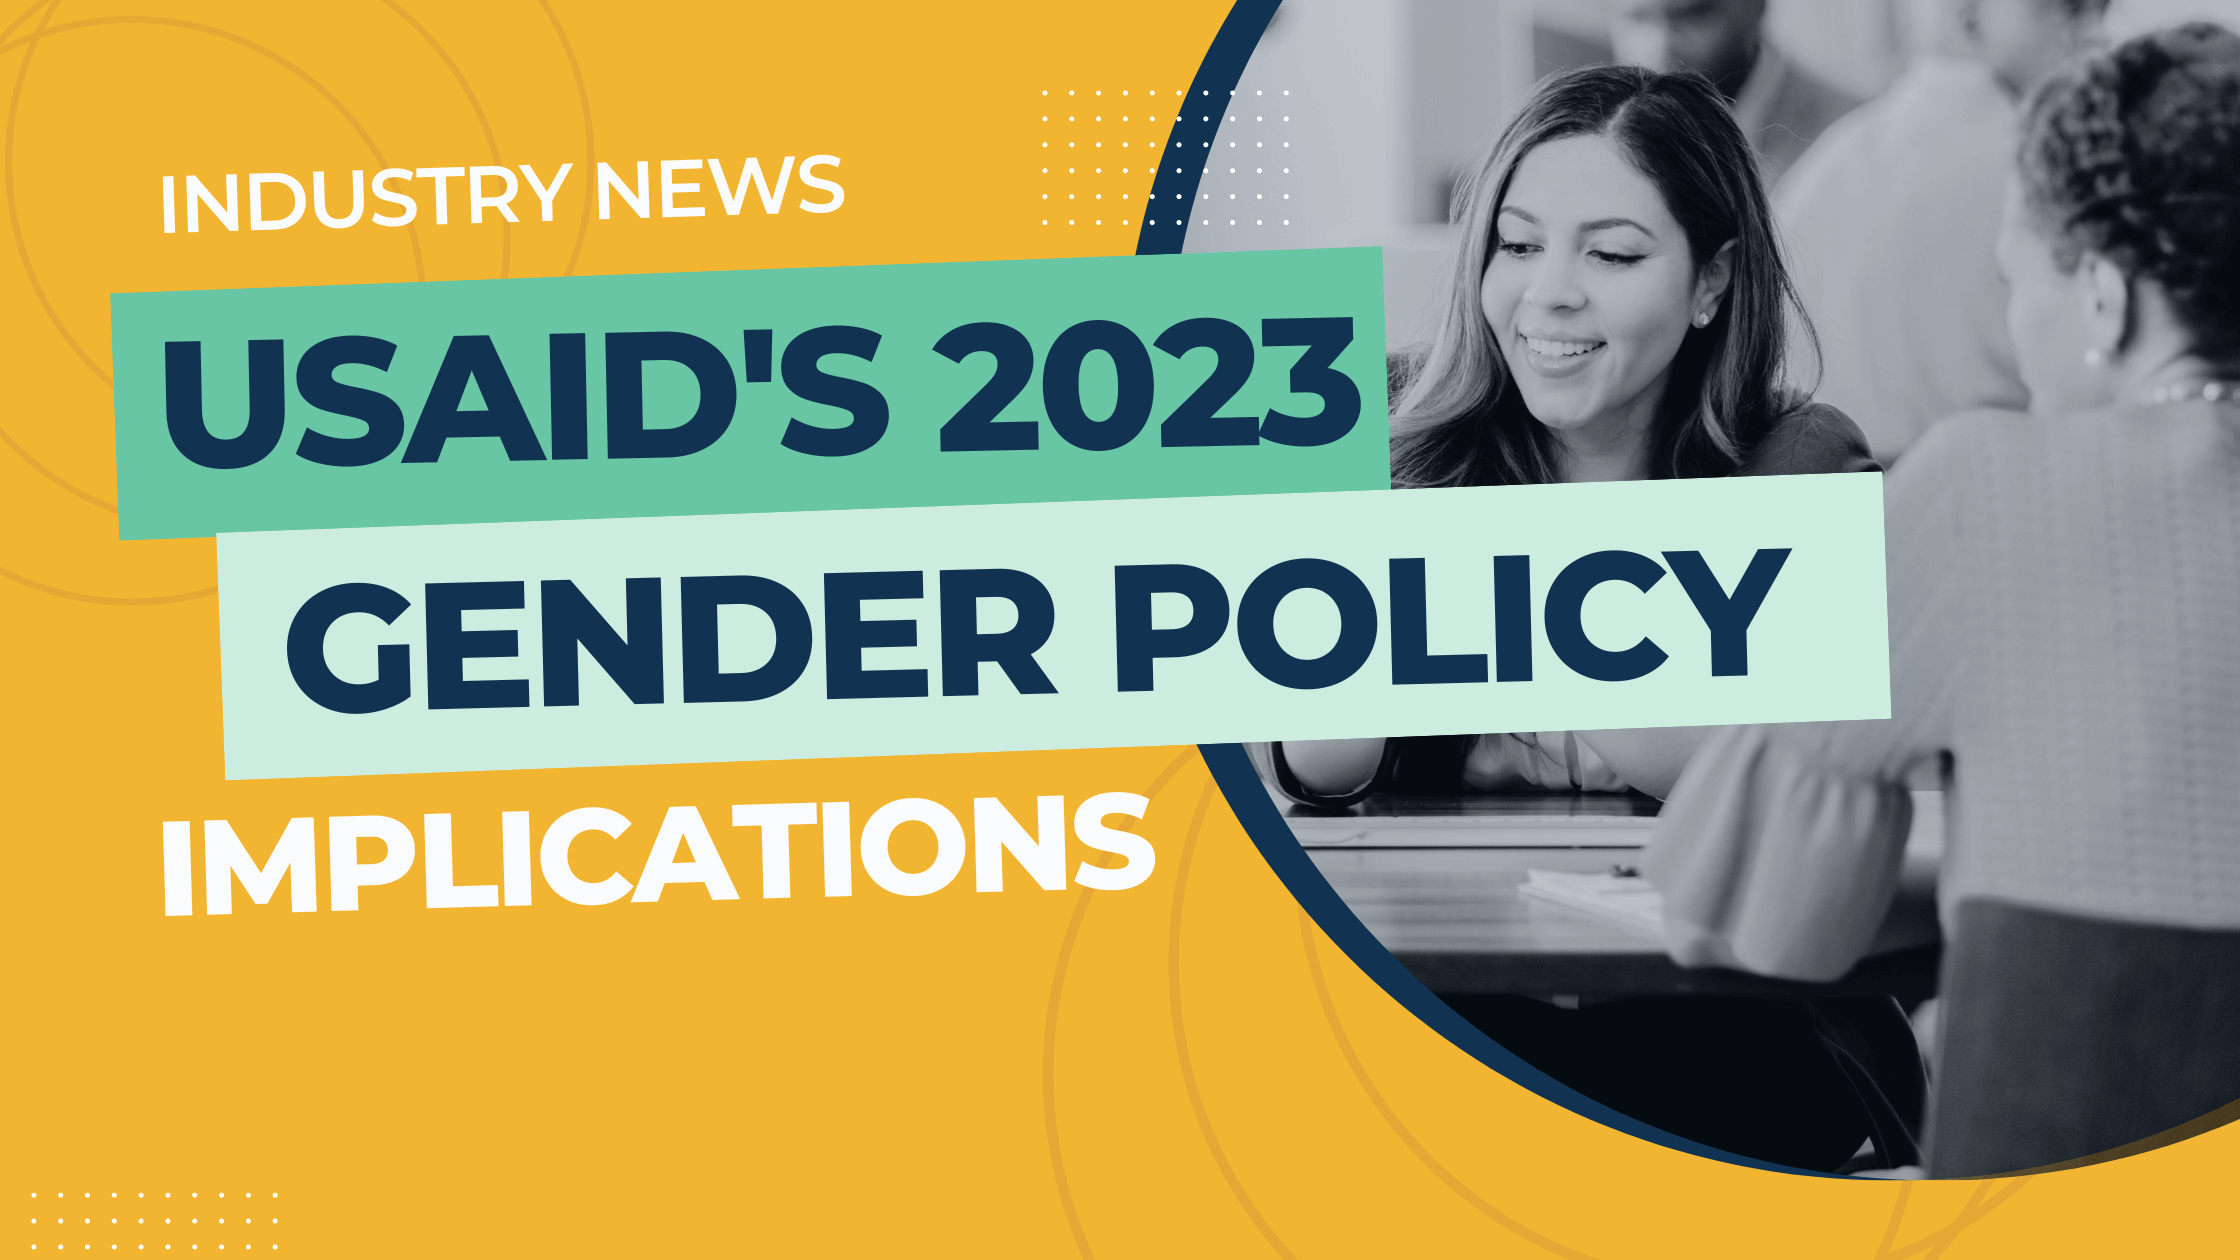 USAID’s 2023 Gender Policy Finally Released